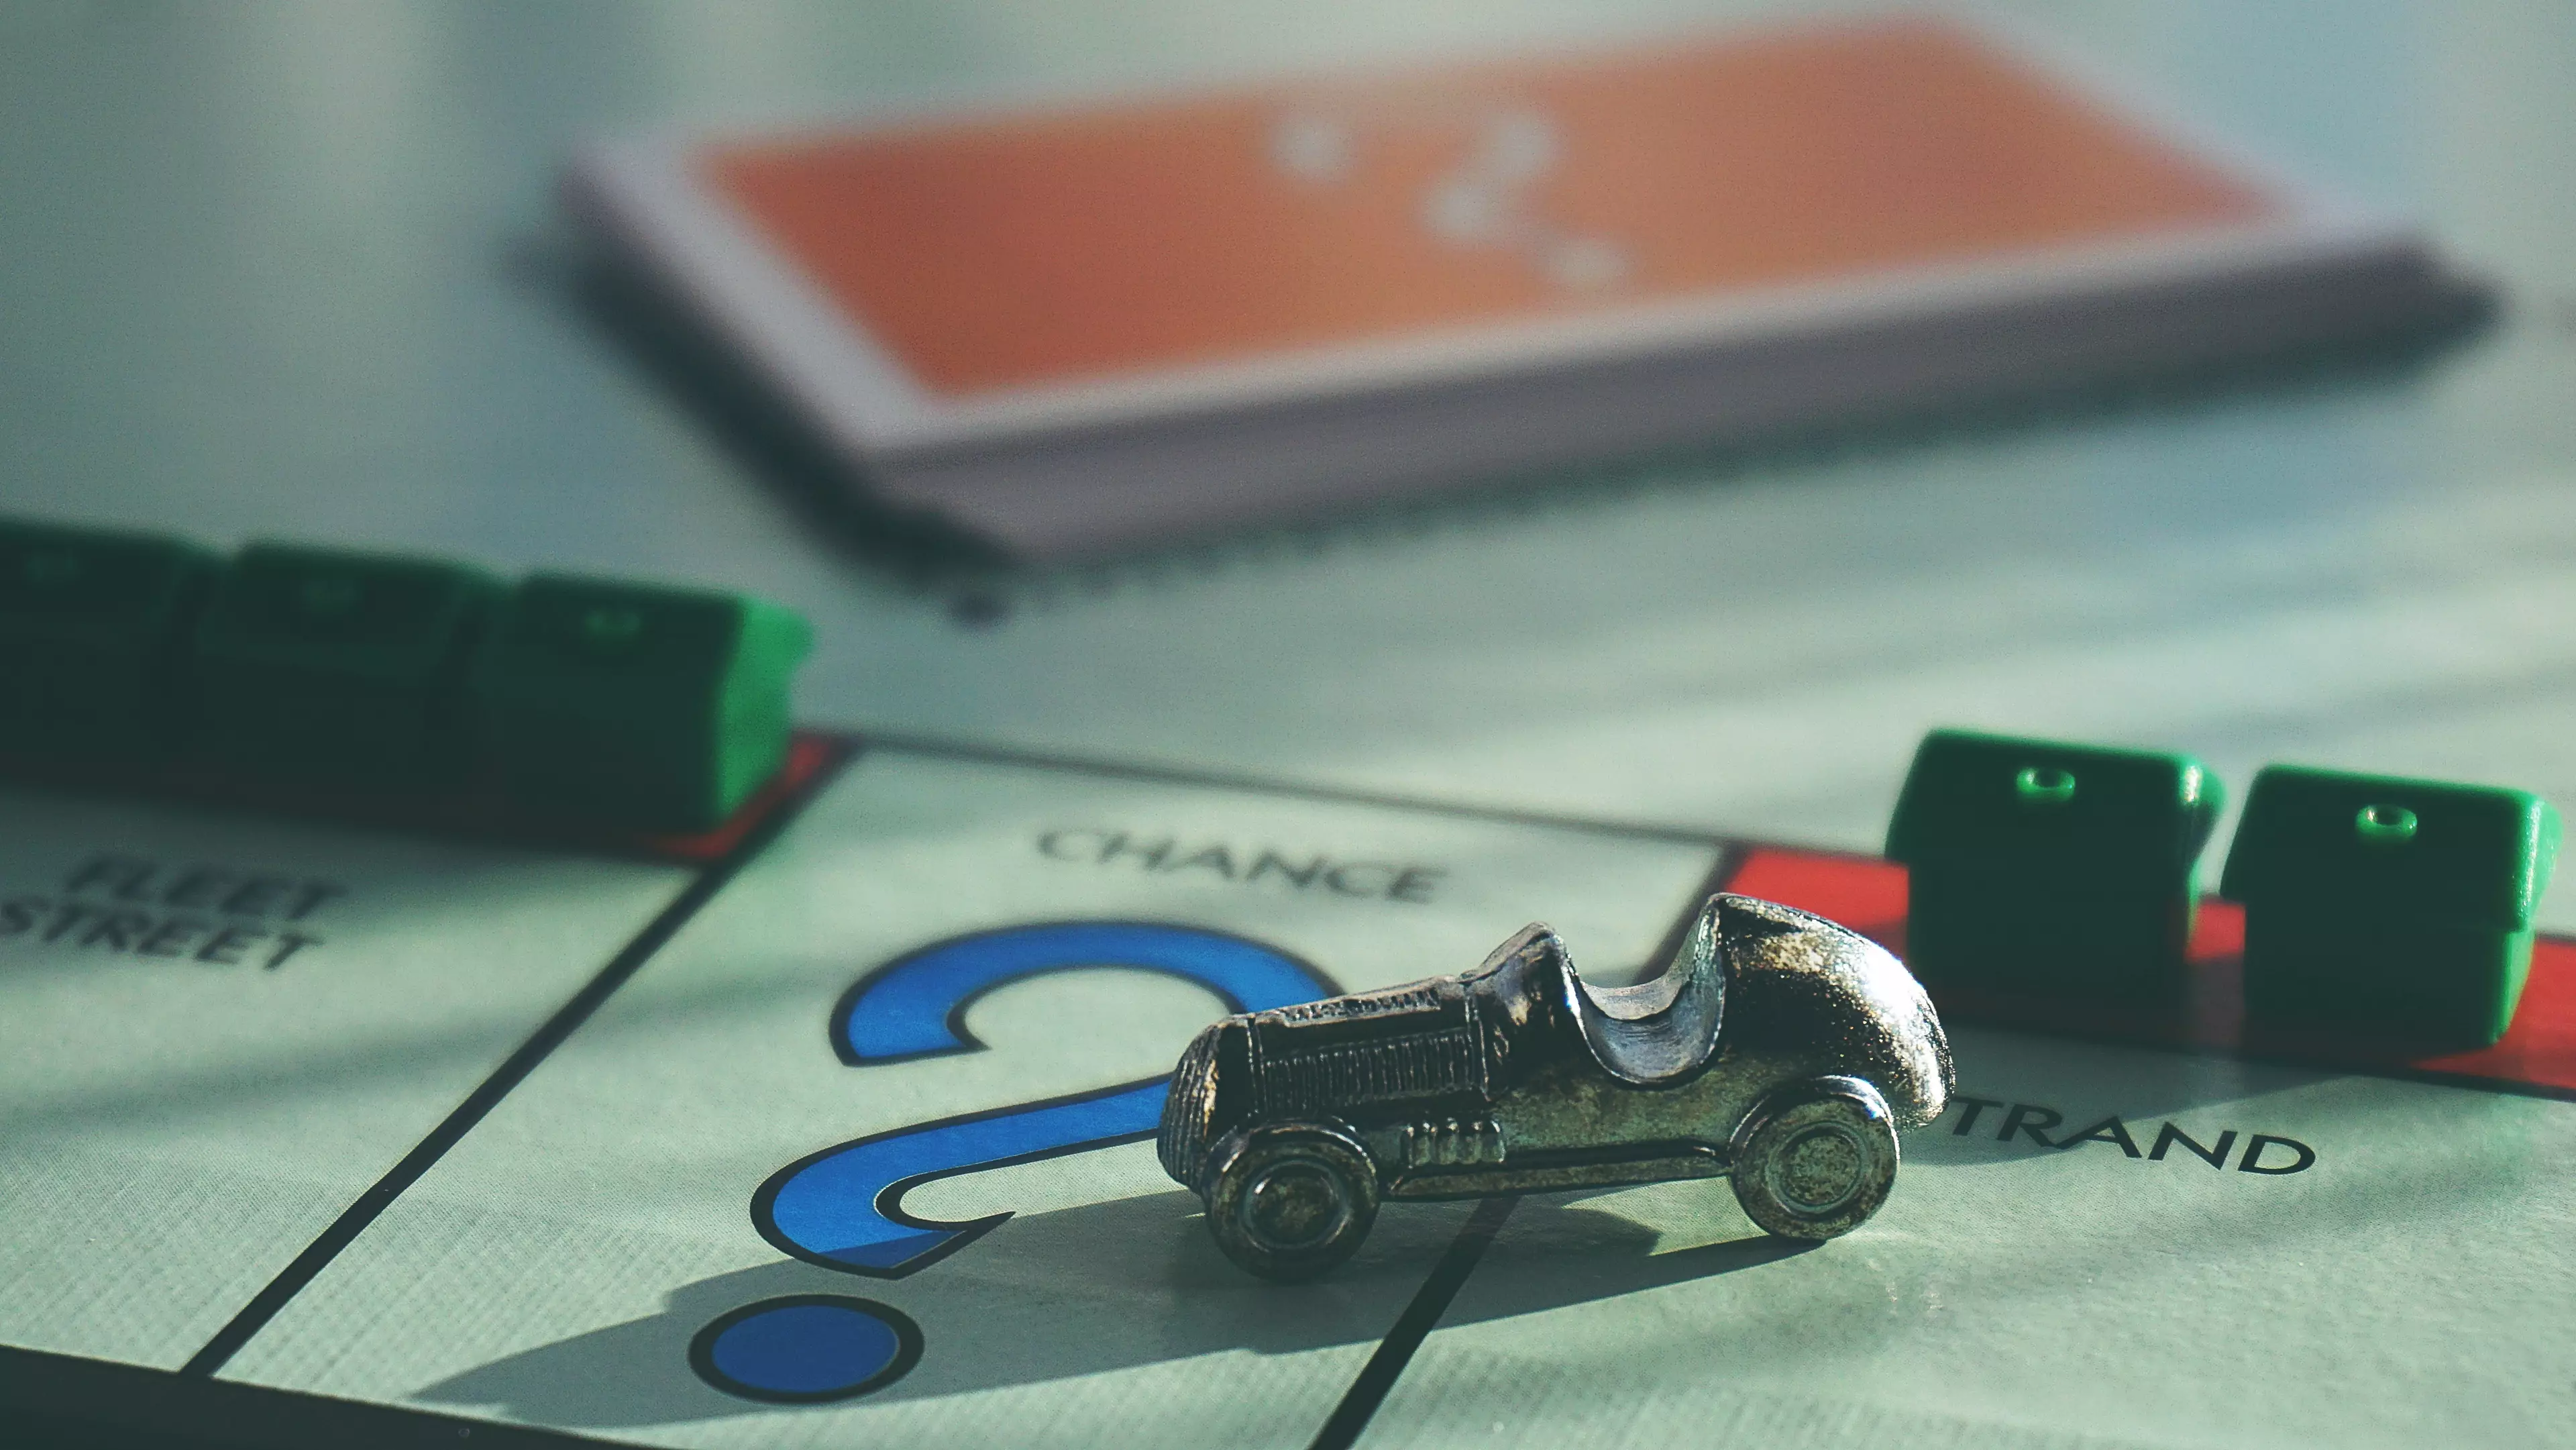 One in 10 people are searching how to cheat in Monopoly (